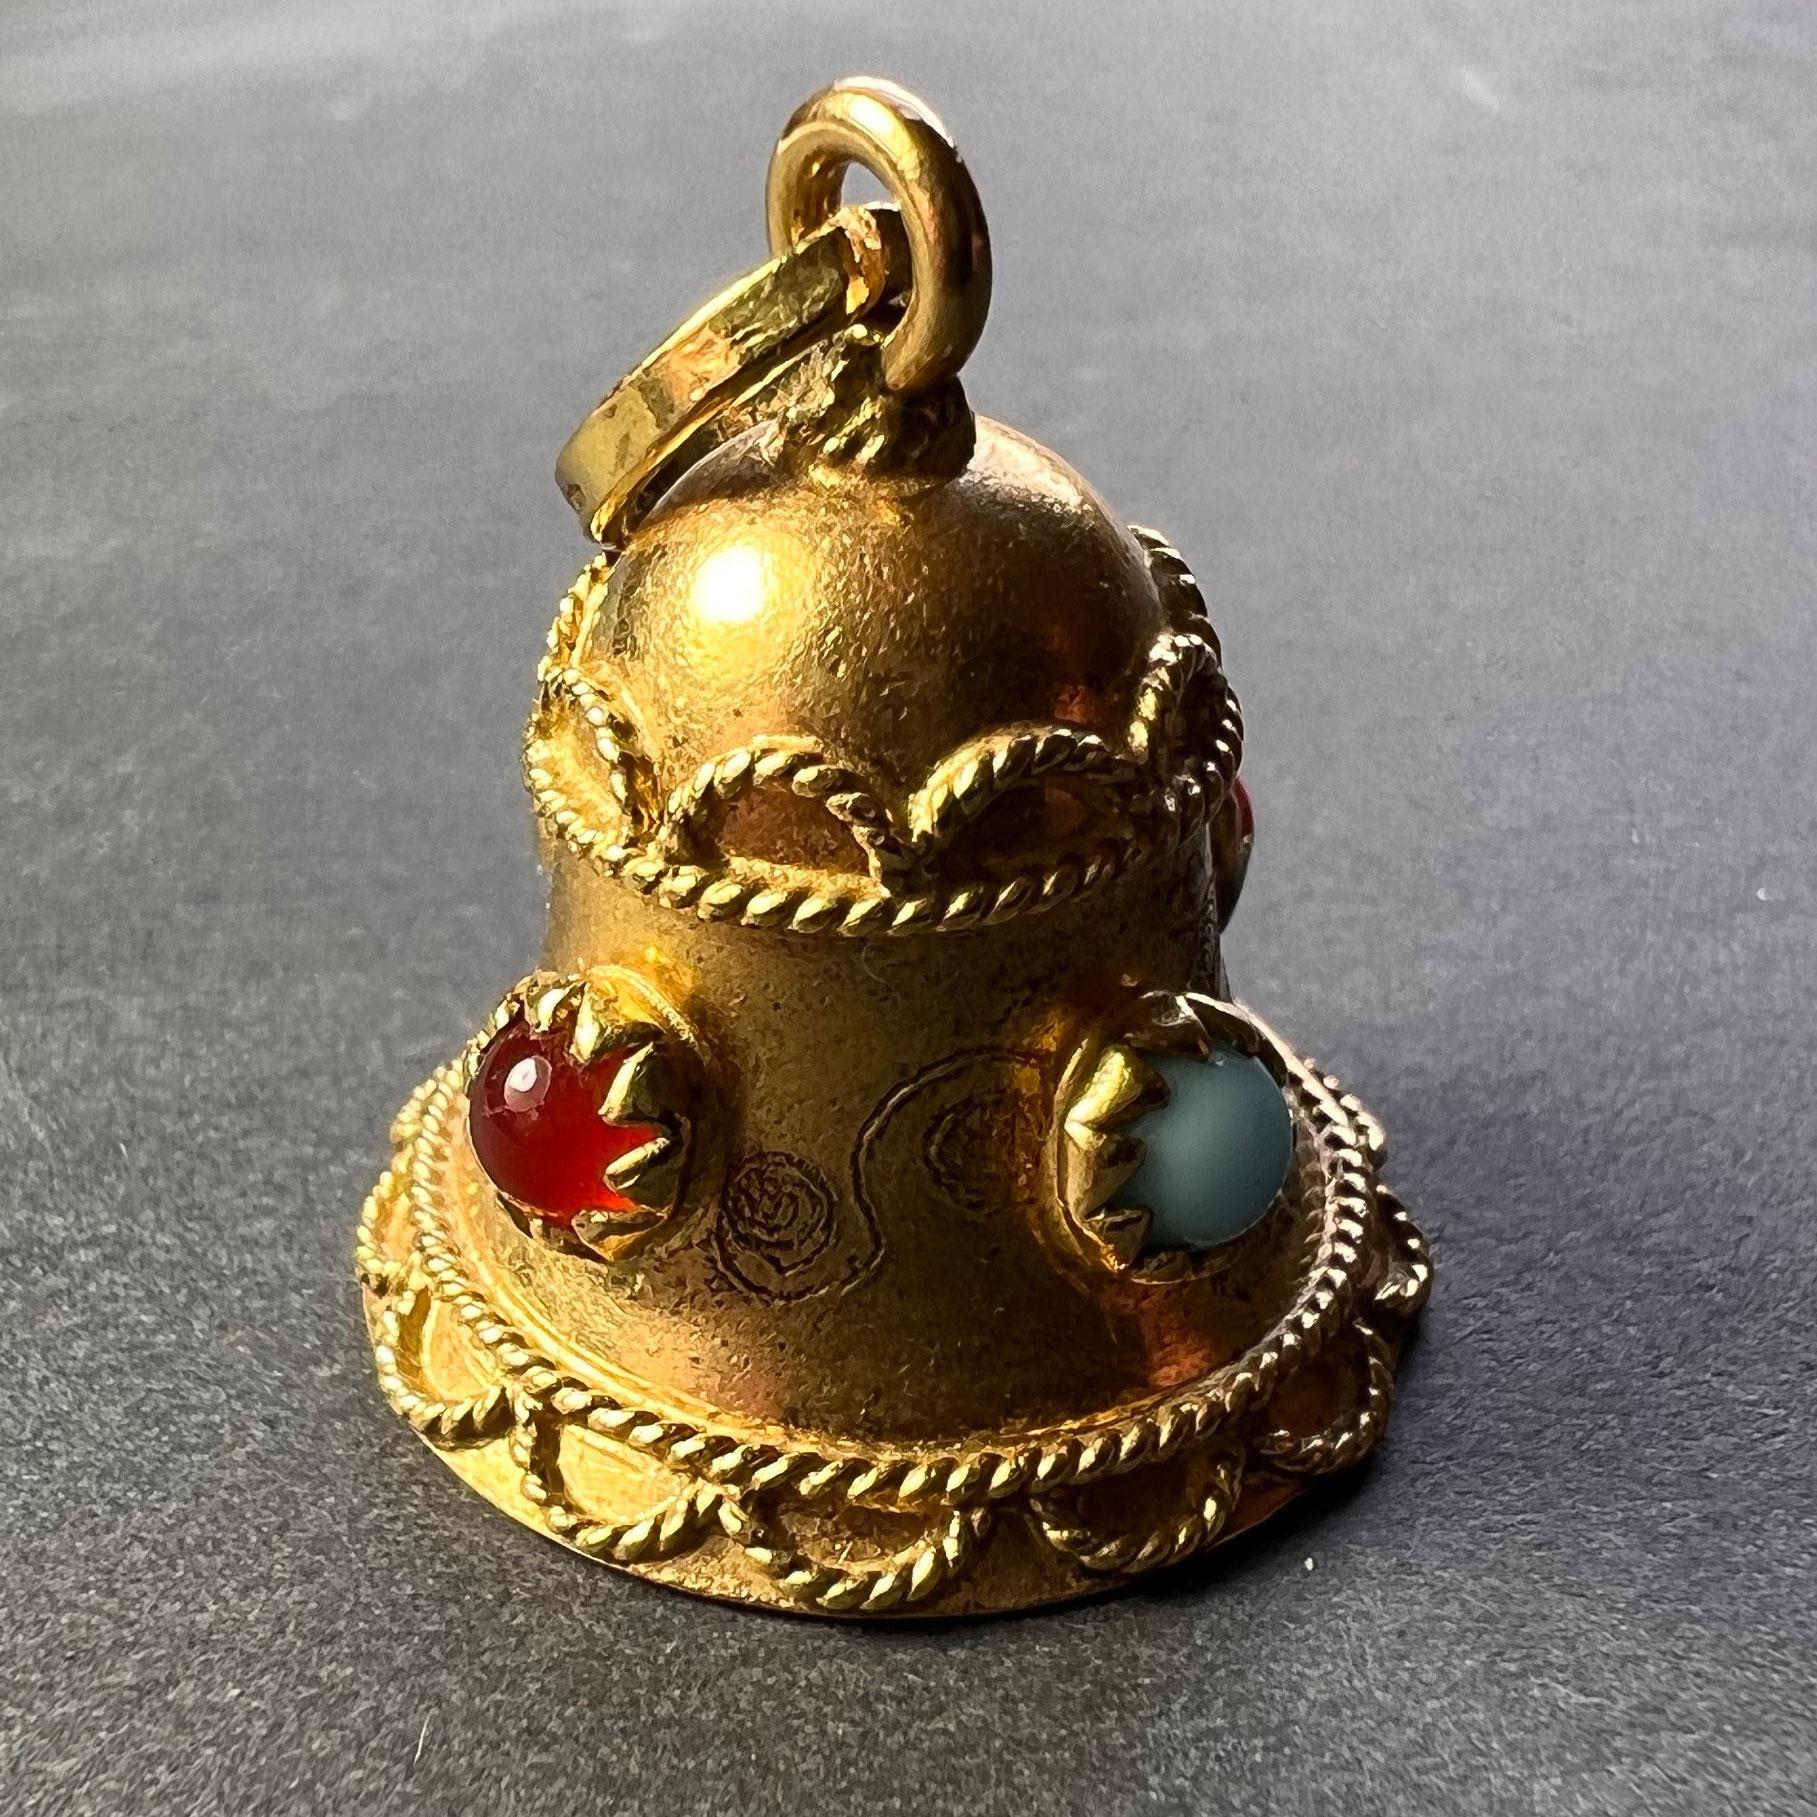 An 18 karat (18K) yellow gold charm pendant designed as a lucky bell set with paste cabochon with a red paste clapper. Stamped 750 for 18 karat gold and 13AR for Italian manufacture to the bail.
 
Dimensions: 2 x 1.65 x 1.65 cm (not including jump